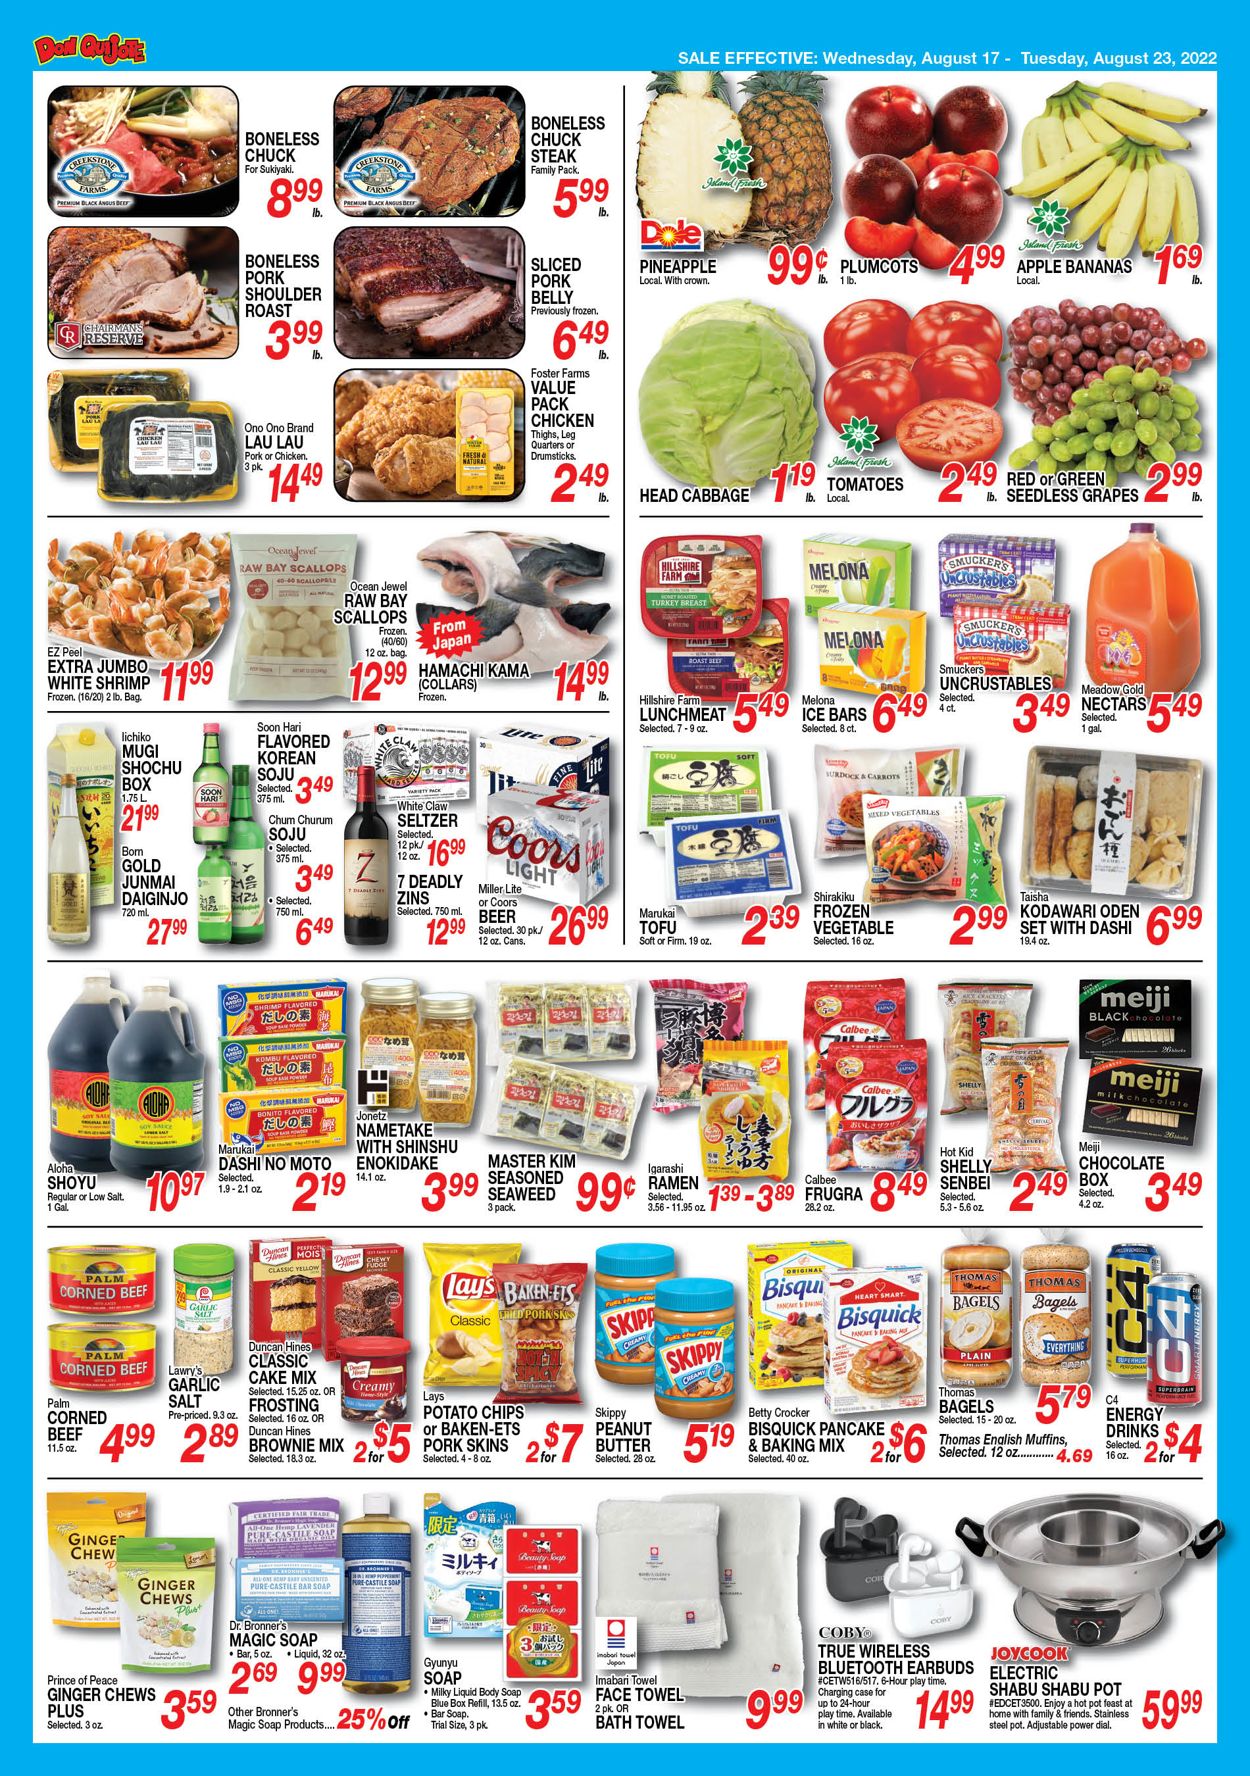 Catalogue Don Quijote Hawaii from 08/17/2022